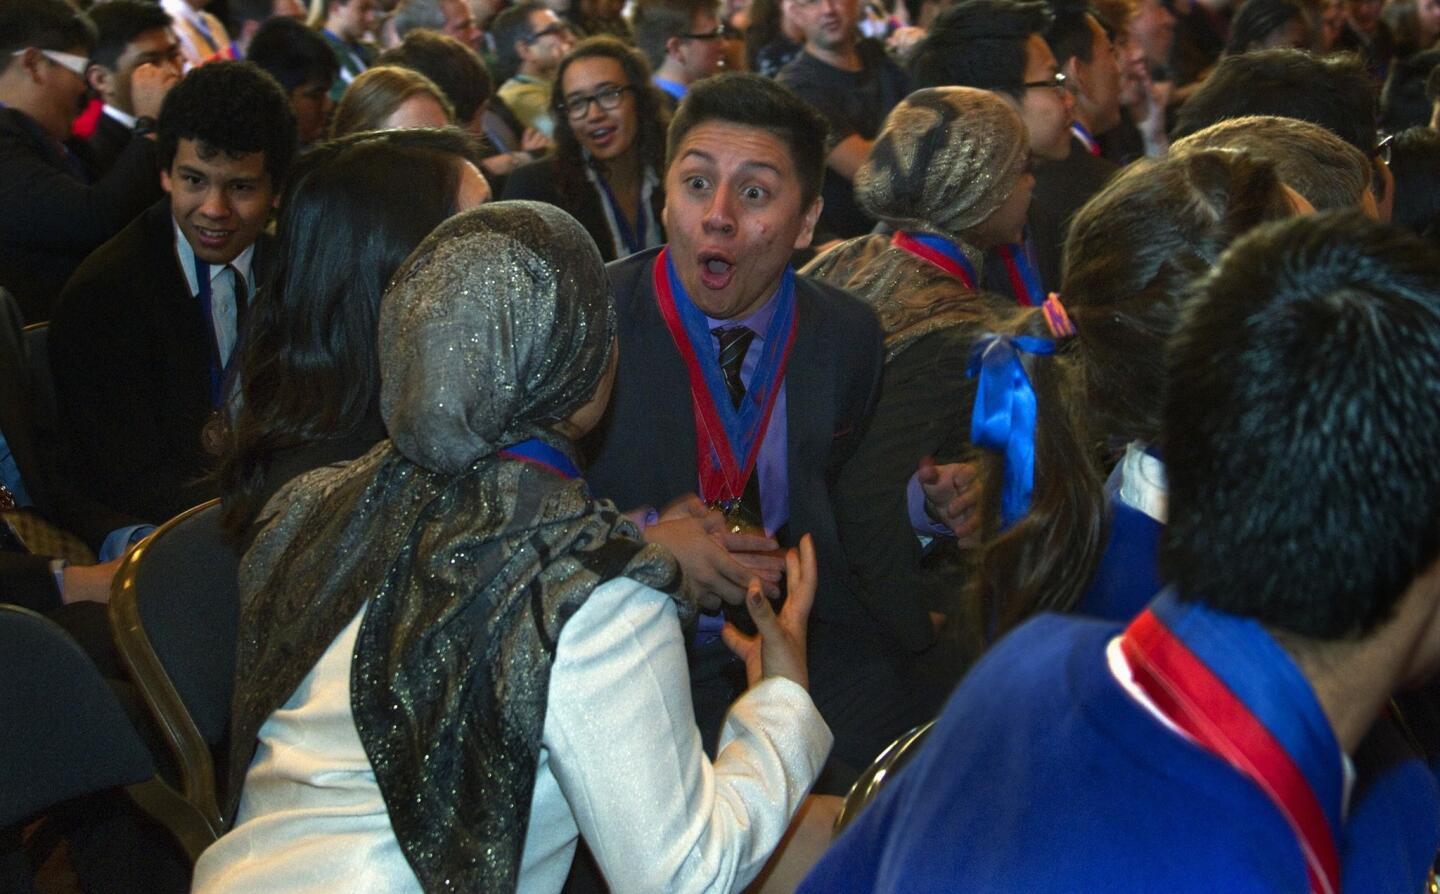 Jose Apolaya of El Camino Real Charter High School, middle, reacts with teammates after the Woodland Hills campus was named winner of the state Academic Decathlon in Sacramento. Granada Hills Charter High, the 2011-13 state and national champion, placed second and John Marshall High School third.